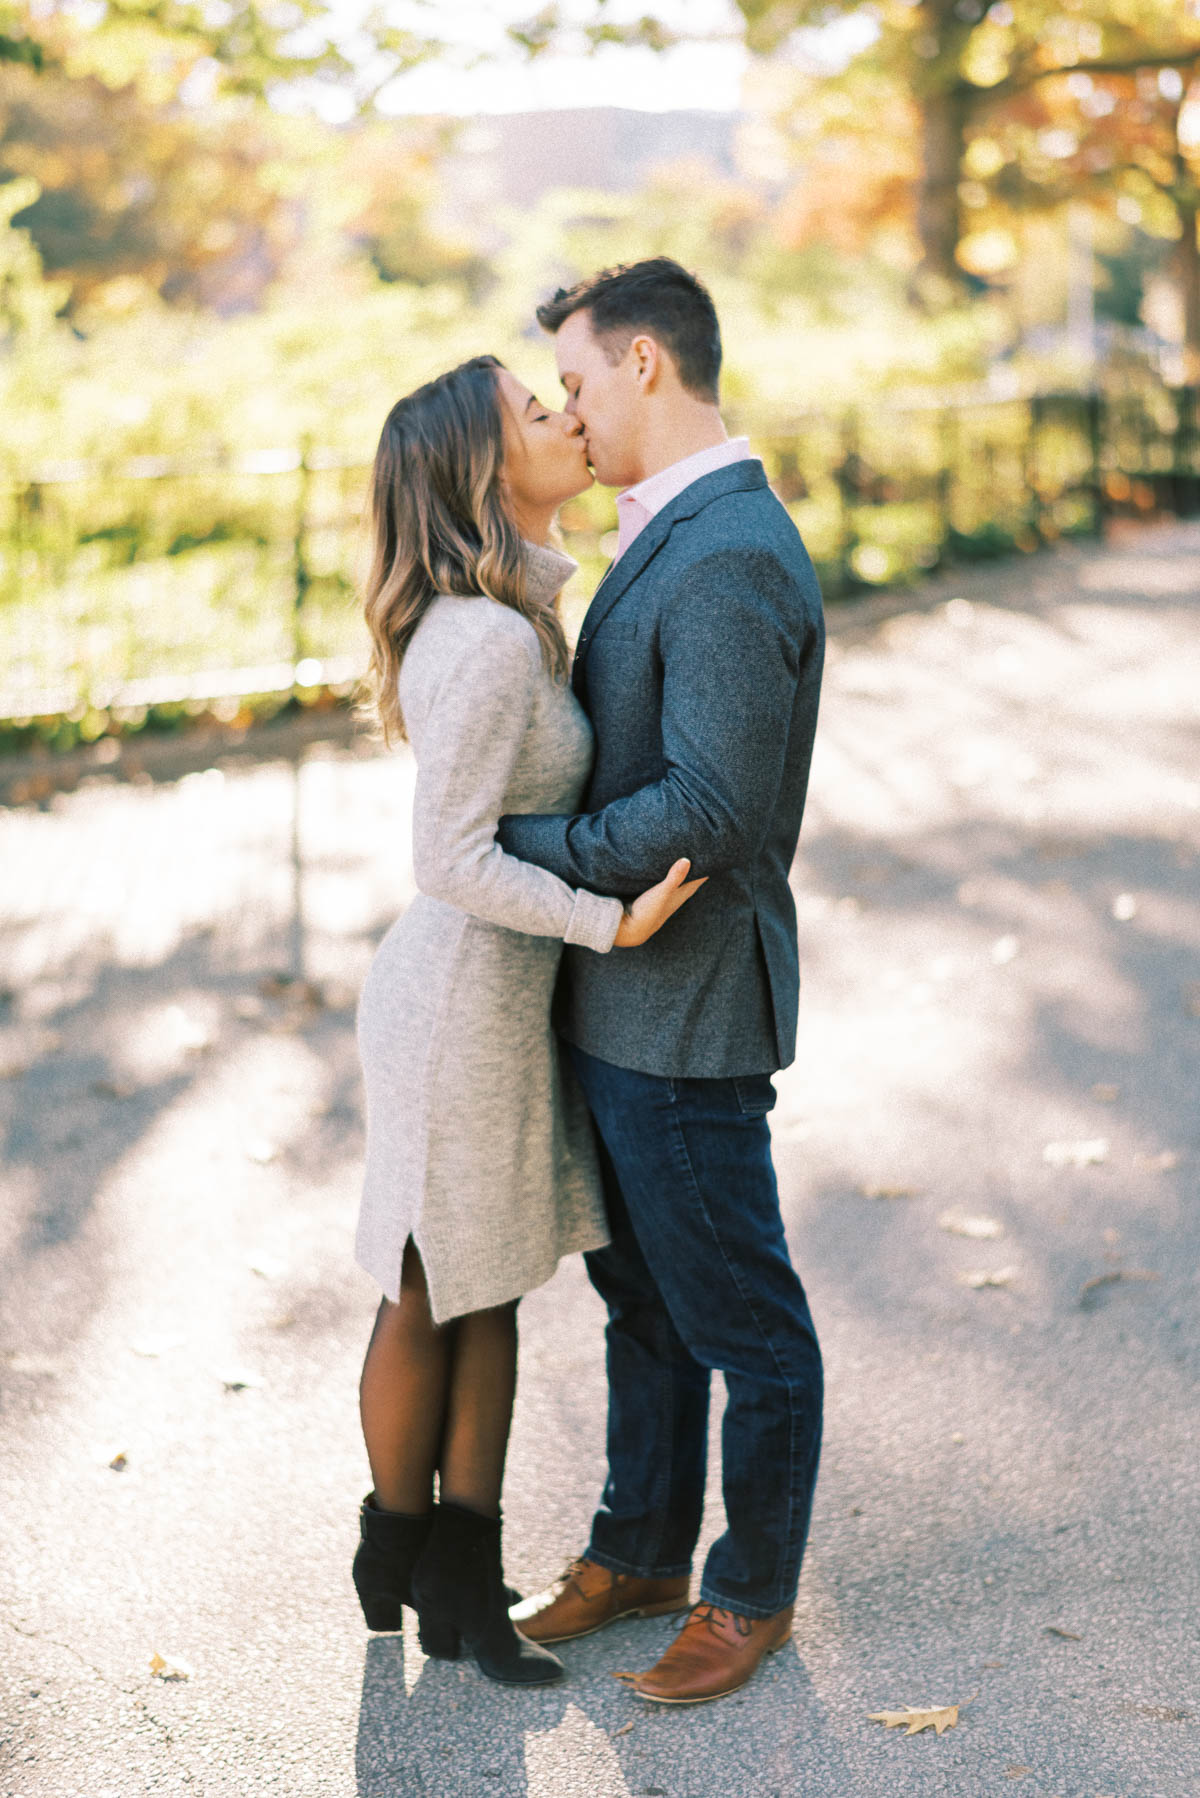 more kissing mcmaster university engagement session